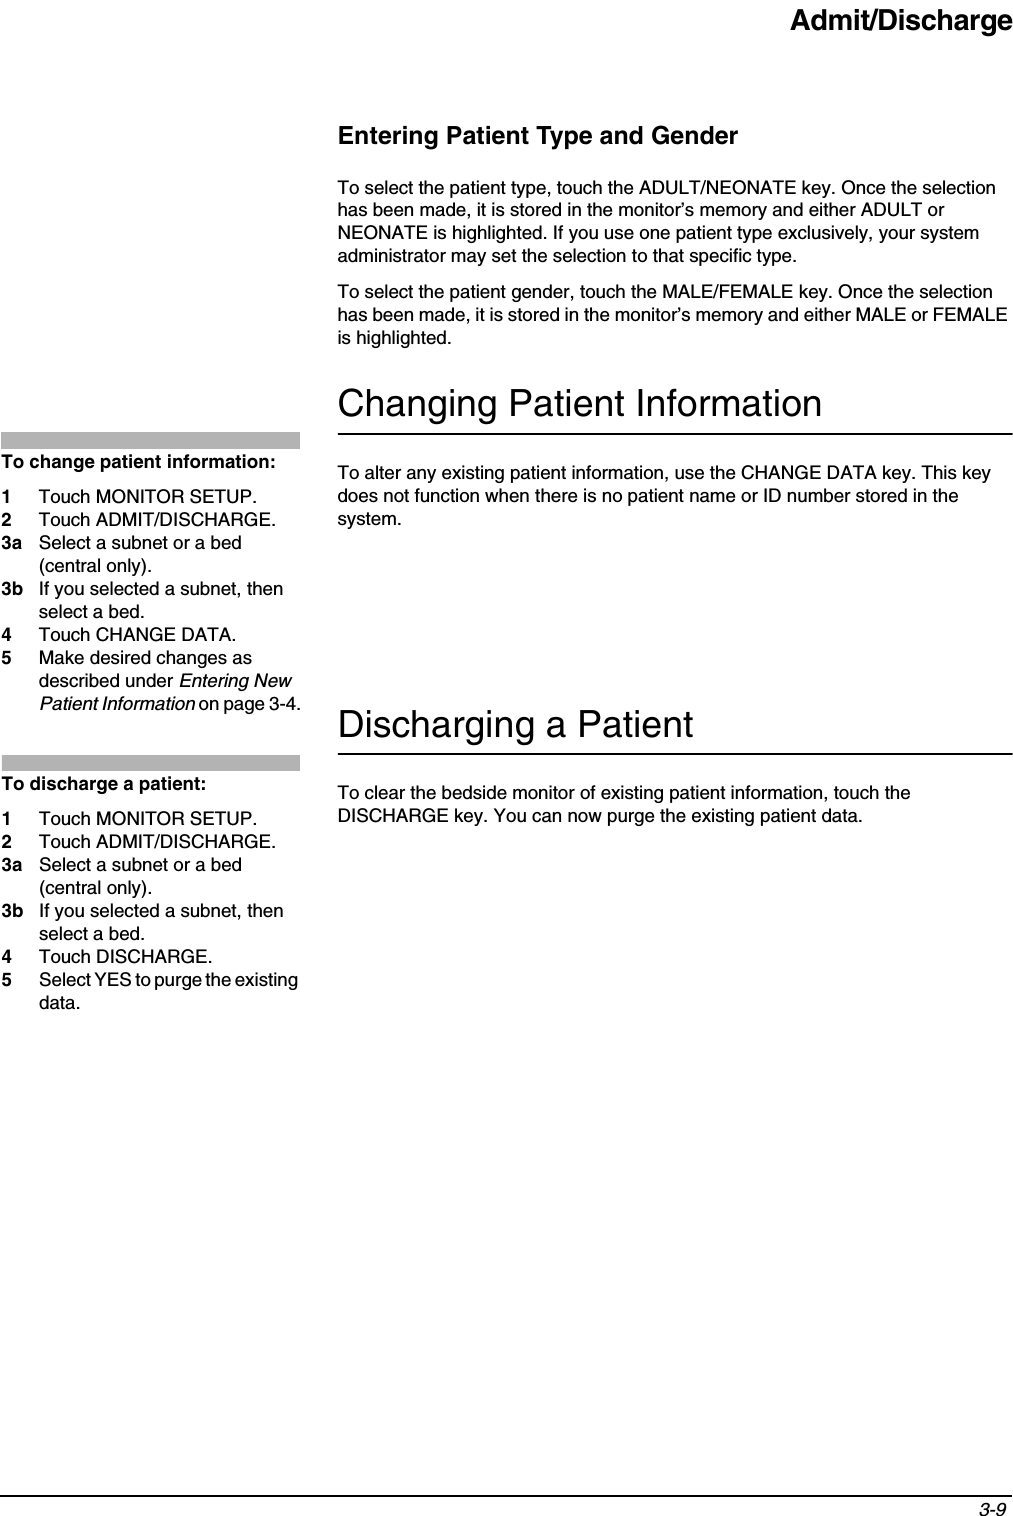 Admit/Discharge3-9 Entering Patient Type and GenderTo select the patient type, touch the ADULT/NEONATE key. Once the selection has been made, it is stored in the monitor’s memory and either ADULT or NEONATE is highlighted. If you use one patient type exclusively, your system administrator may set the selection to that specific type.To select the patient gender, touch the MALE/FEMALE key. Once the selection has been made, it is stored in the monitor’s memory and either MALE or FEMALE is highlighted.Changing Patient InformationTo alter any existing patient information, use the CHANGE DATA key. This key does not function when there is no patient name or ID number stored in the system.Discharging a PatientTo clear the bedside monitor of existing patient information, touch the DISCHARGE key. You can now purge the existing patient data.To change patient information:1Touch MONITOR SETUP.2Touch ADMIT/DISCHARGE.3a Select a subnet or a bed (central only).3b If you selected a subnet, then select a bed.4Touch CHANGE DATA.5Make desired changes as described under Entering New Patient Information on page 3-4.To discharge a patient:1Touch MONITOR SETUP.2Touch ADMIT/DISCHARGE.3a Select a subnet or a bed (central only).3b If you selected a subnet, then select a bed.4Touch DISCHARGE.5Select YES to purge the existing data.